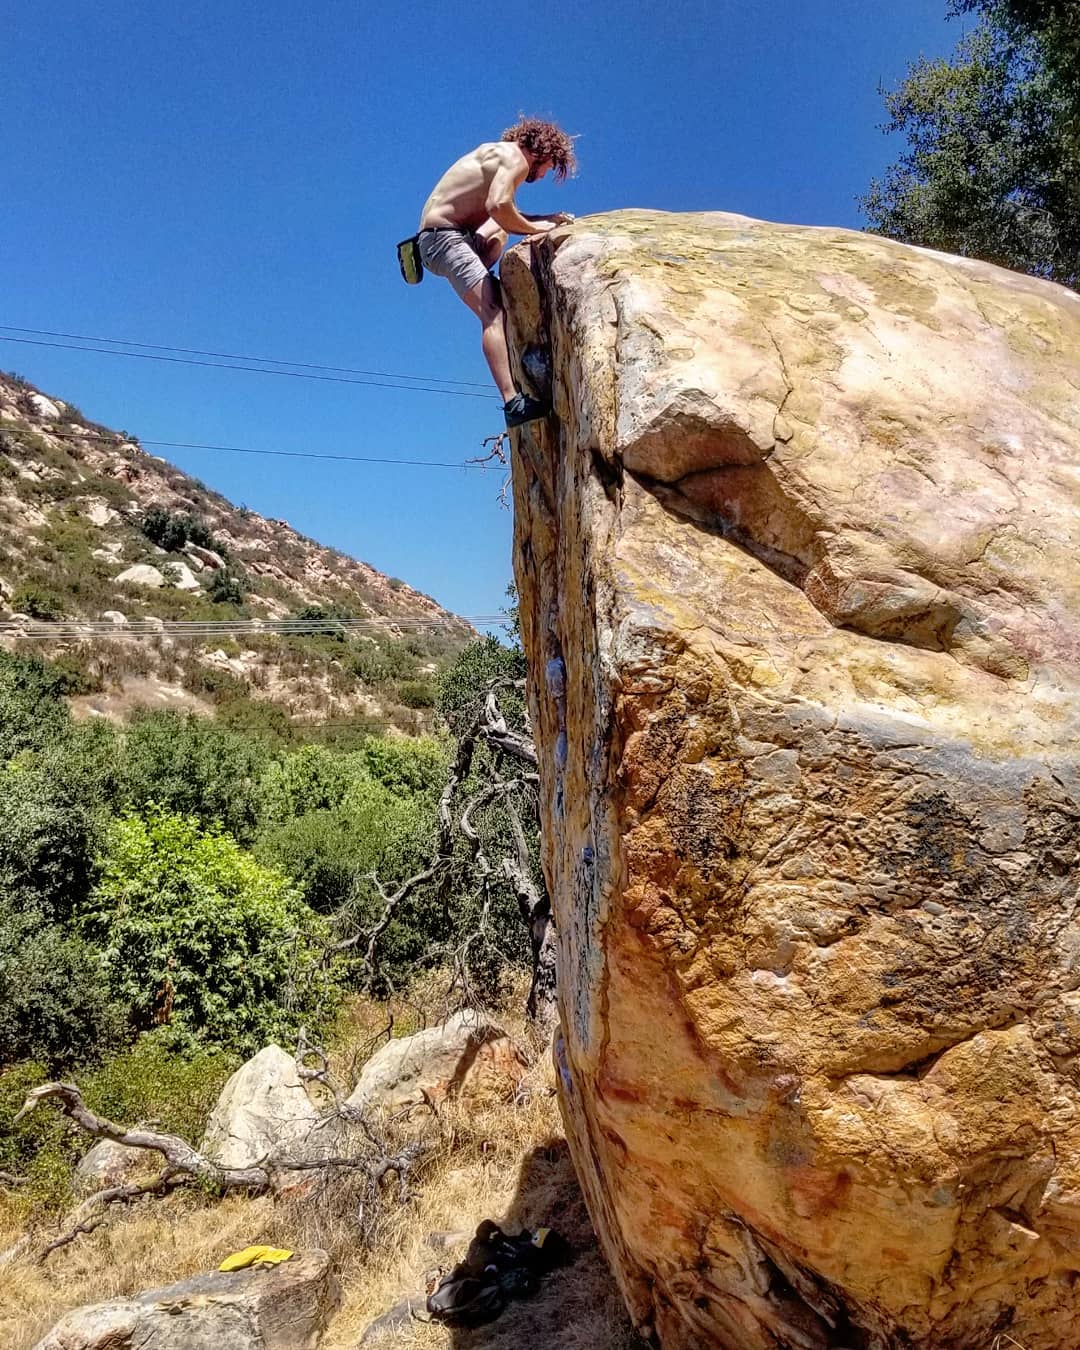 Topping out seems to be the goal. But it is really not....#chillinorockclimbing #rockclimbing #bouldering #climbing_pictures_of_instagram #sandiego #sandiegorockclimbing #guides #guiding #optoutside